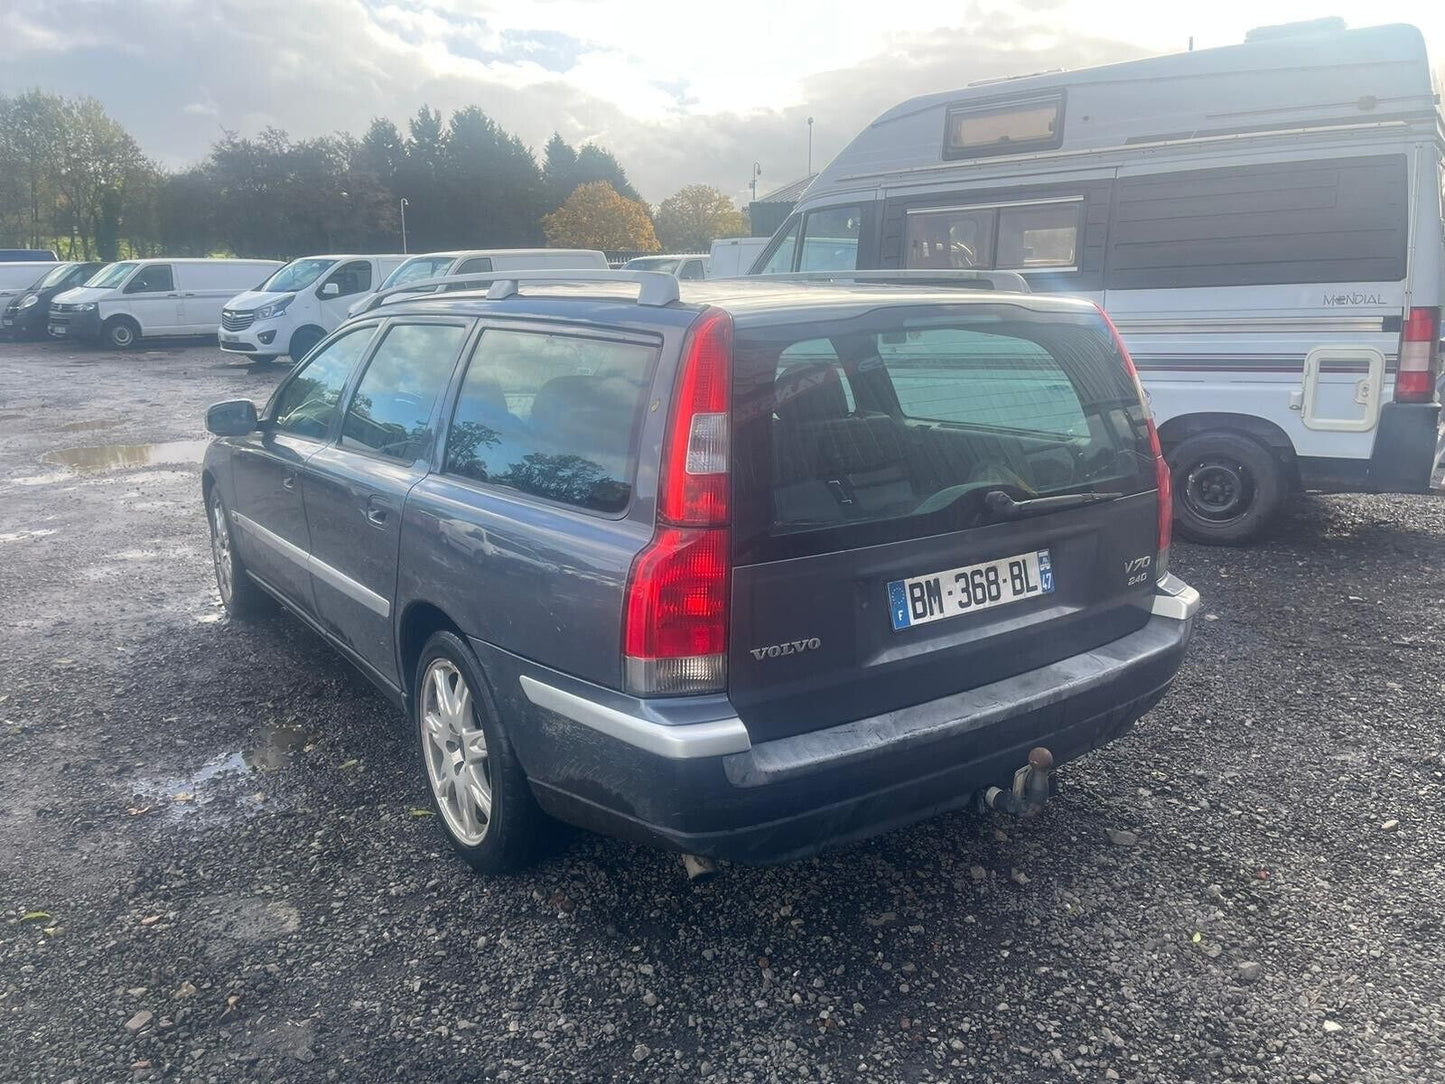 Bid on RELIABLE ADVENTURE: 2003 VOLVO V70 D5 TURBO DIESEL - DRIVEN FROM FRANCE - NO VAT ON HAMMER- Buy &amp; Sell on Auction with EAMA Group